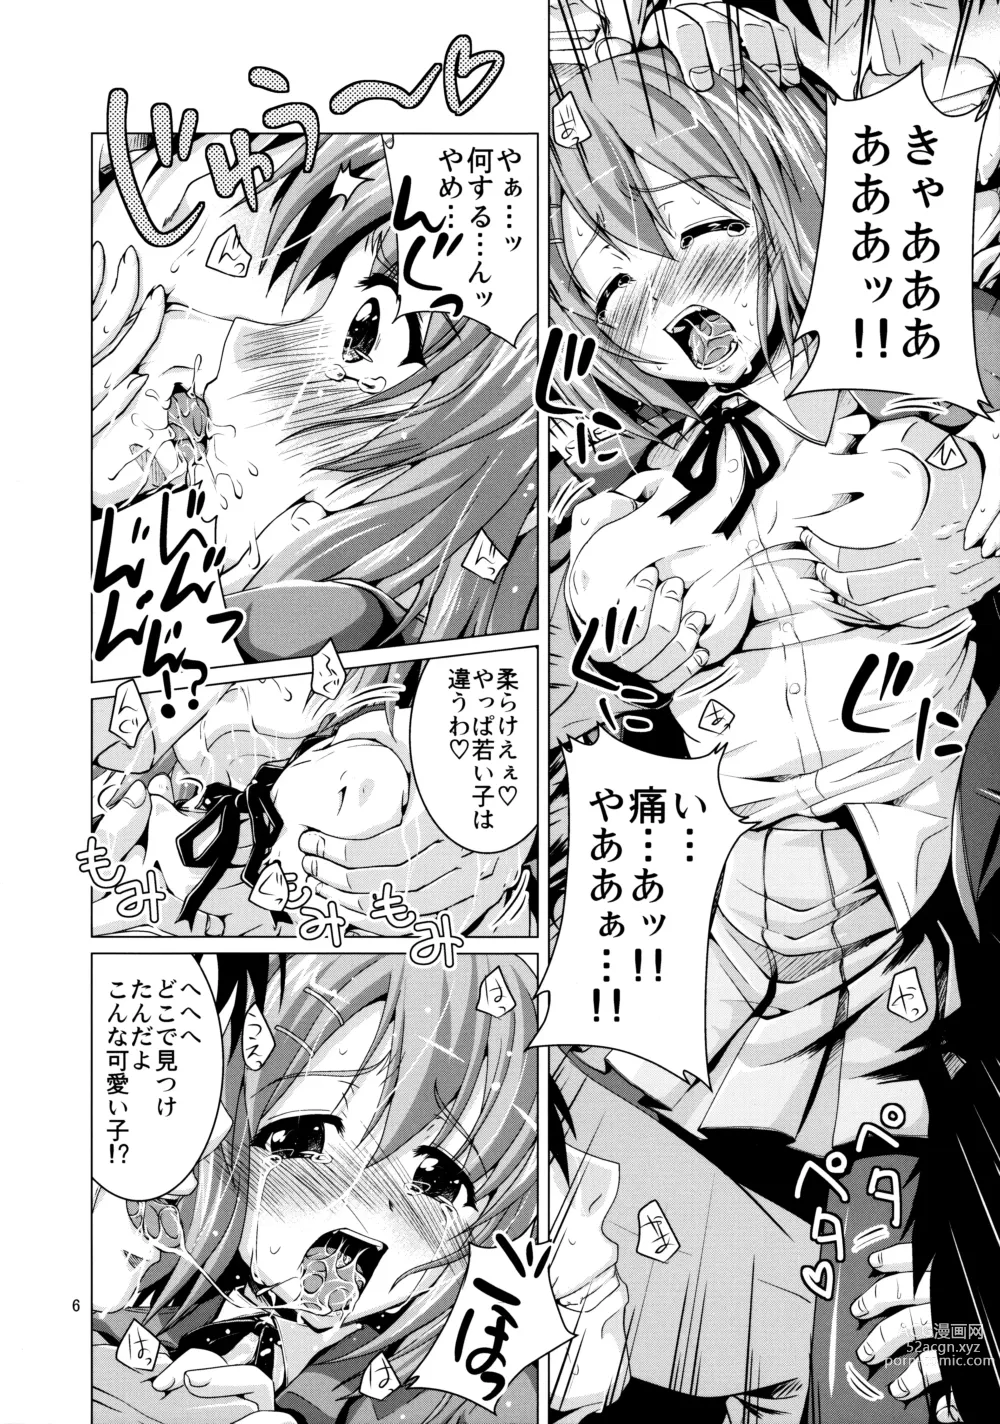 Page 6 of doujinshi Alumi Can Contest